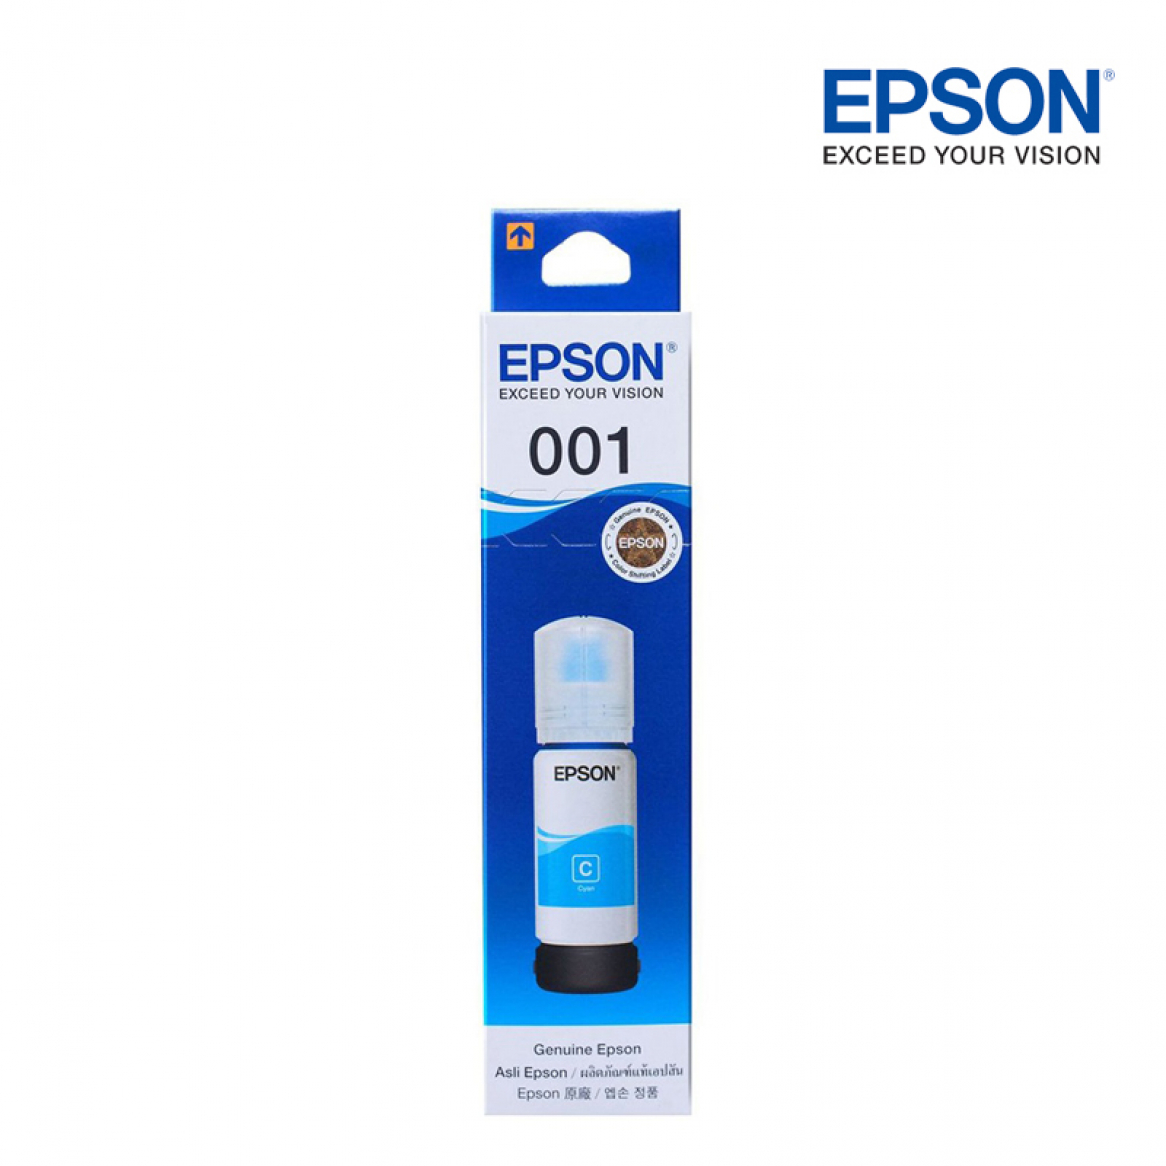 Epson Ink 001 Cyan T03Y200 for L4160 L6190 L6170 L6160